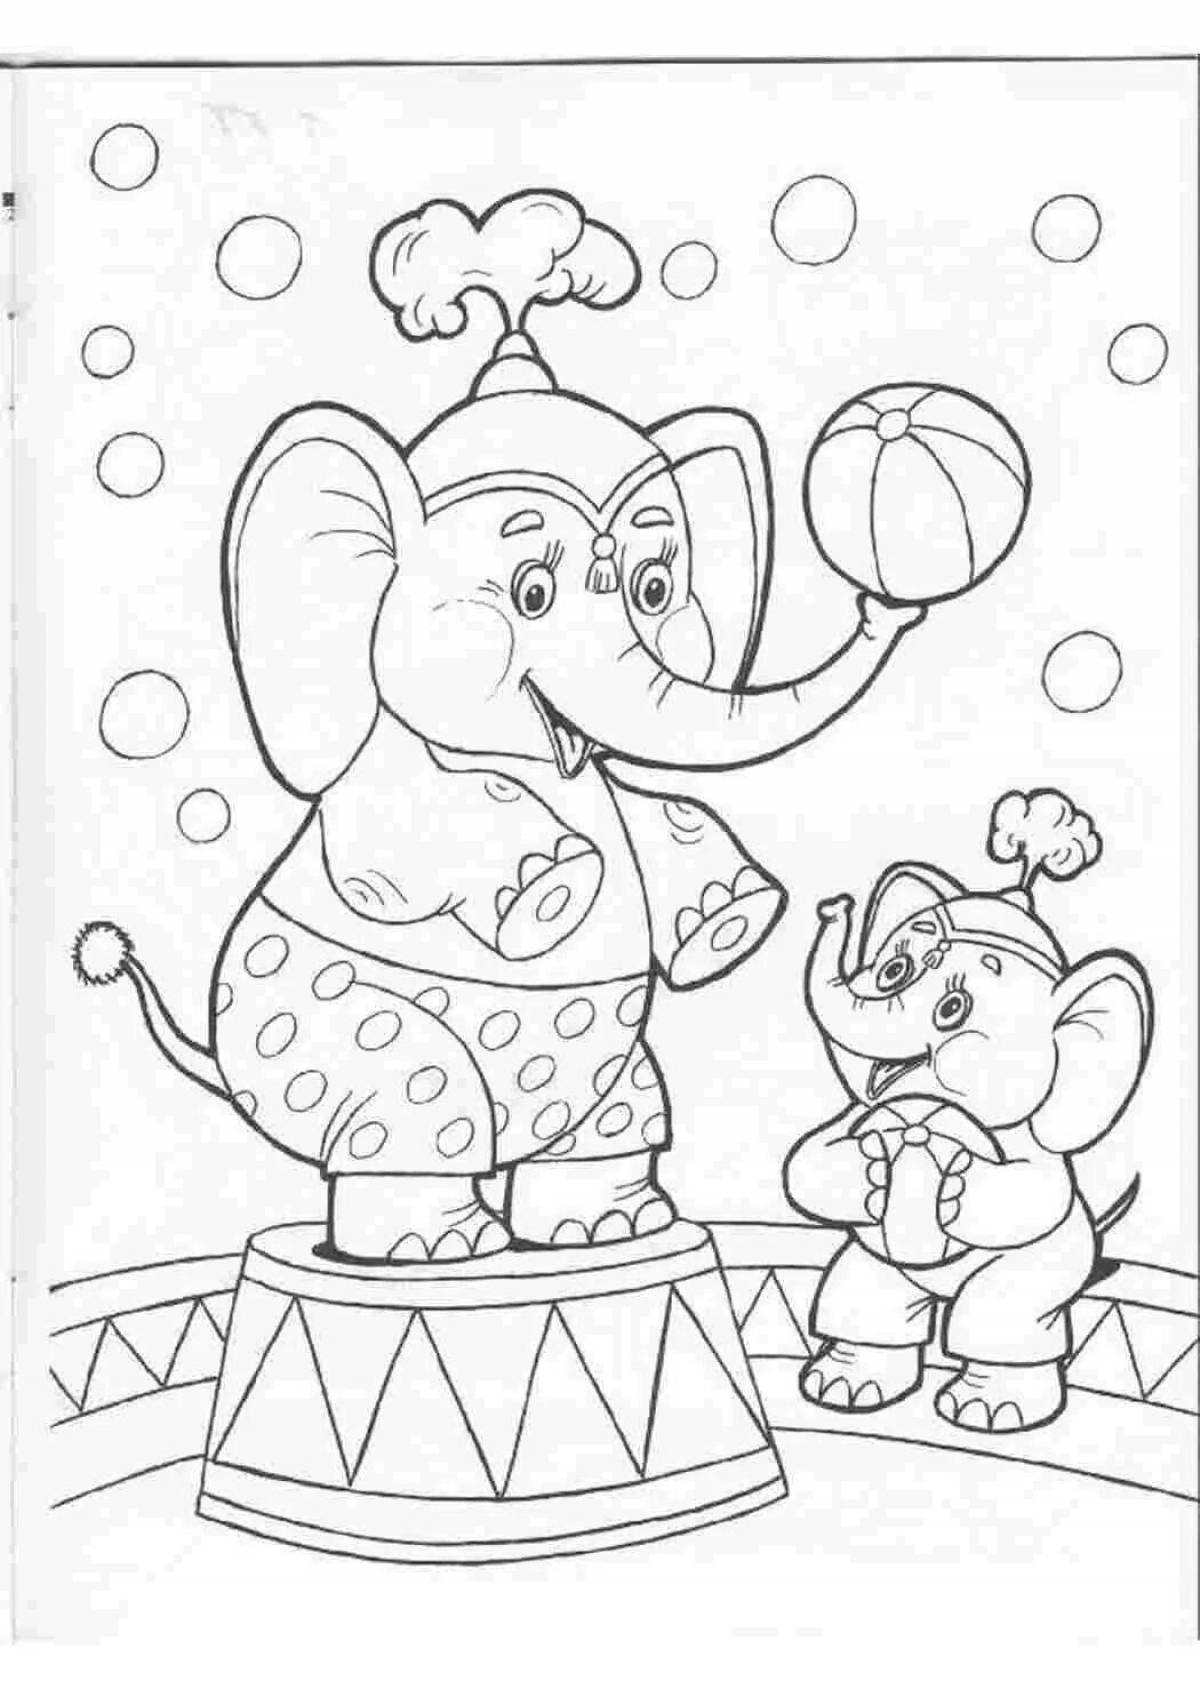 Circus coloring book with bright eyes for children 5-6 years old